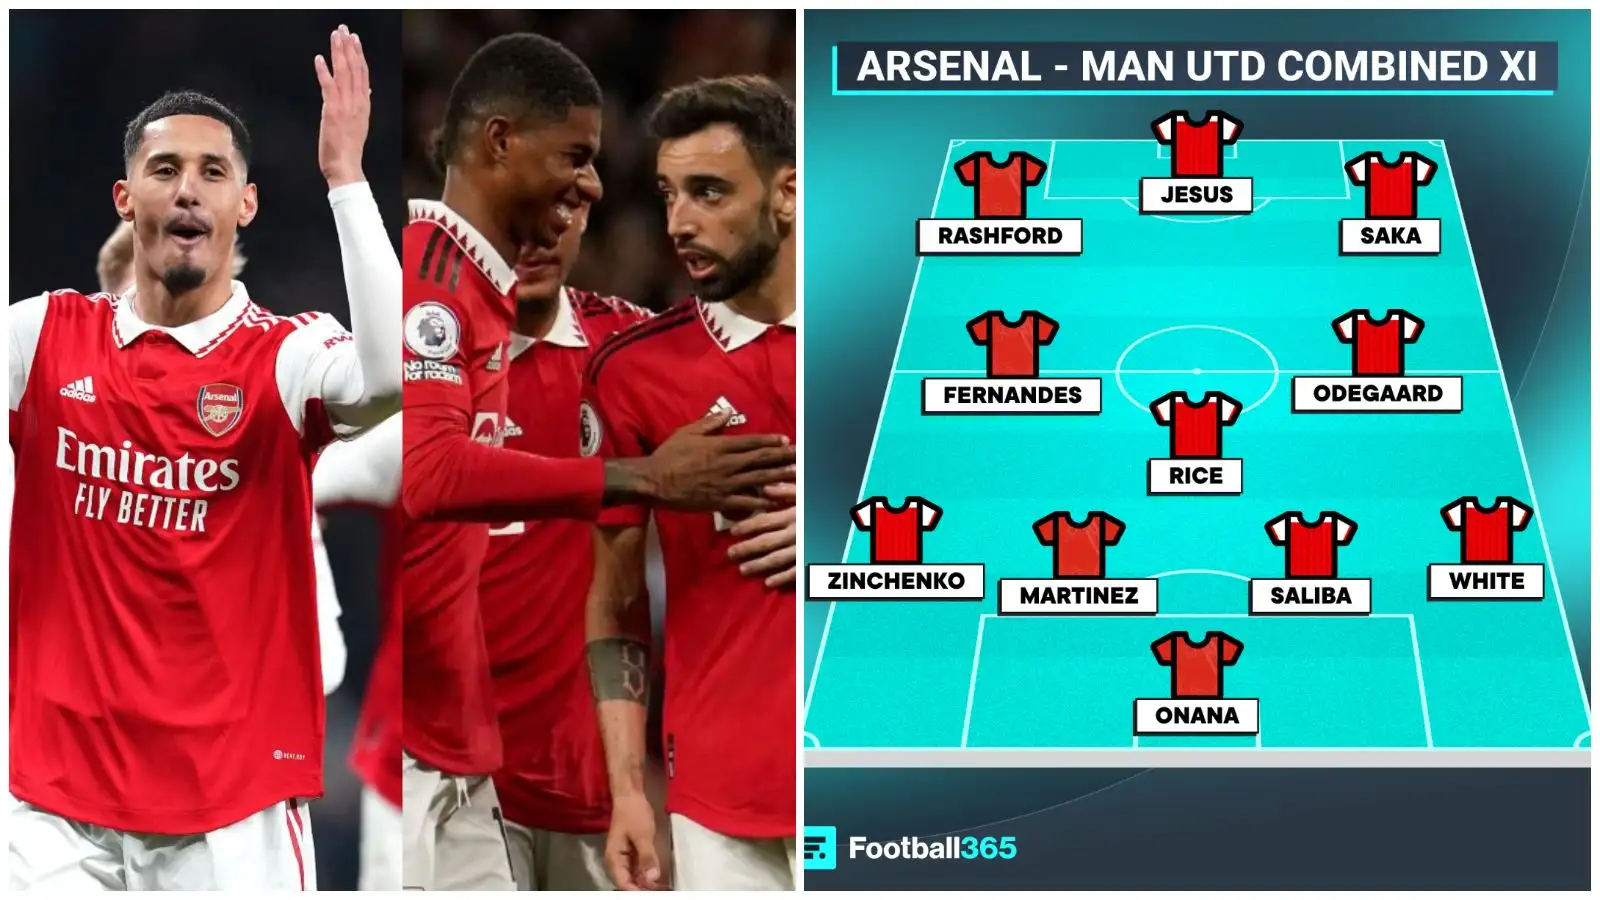 Arsenal - Manchester United combined XI features William Saliba, Marcus Rashford and Bruno Fernandes.